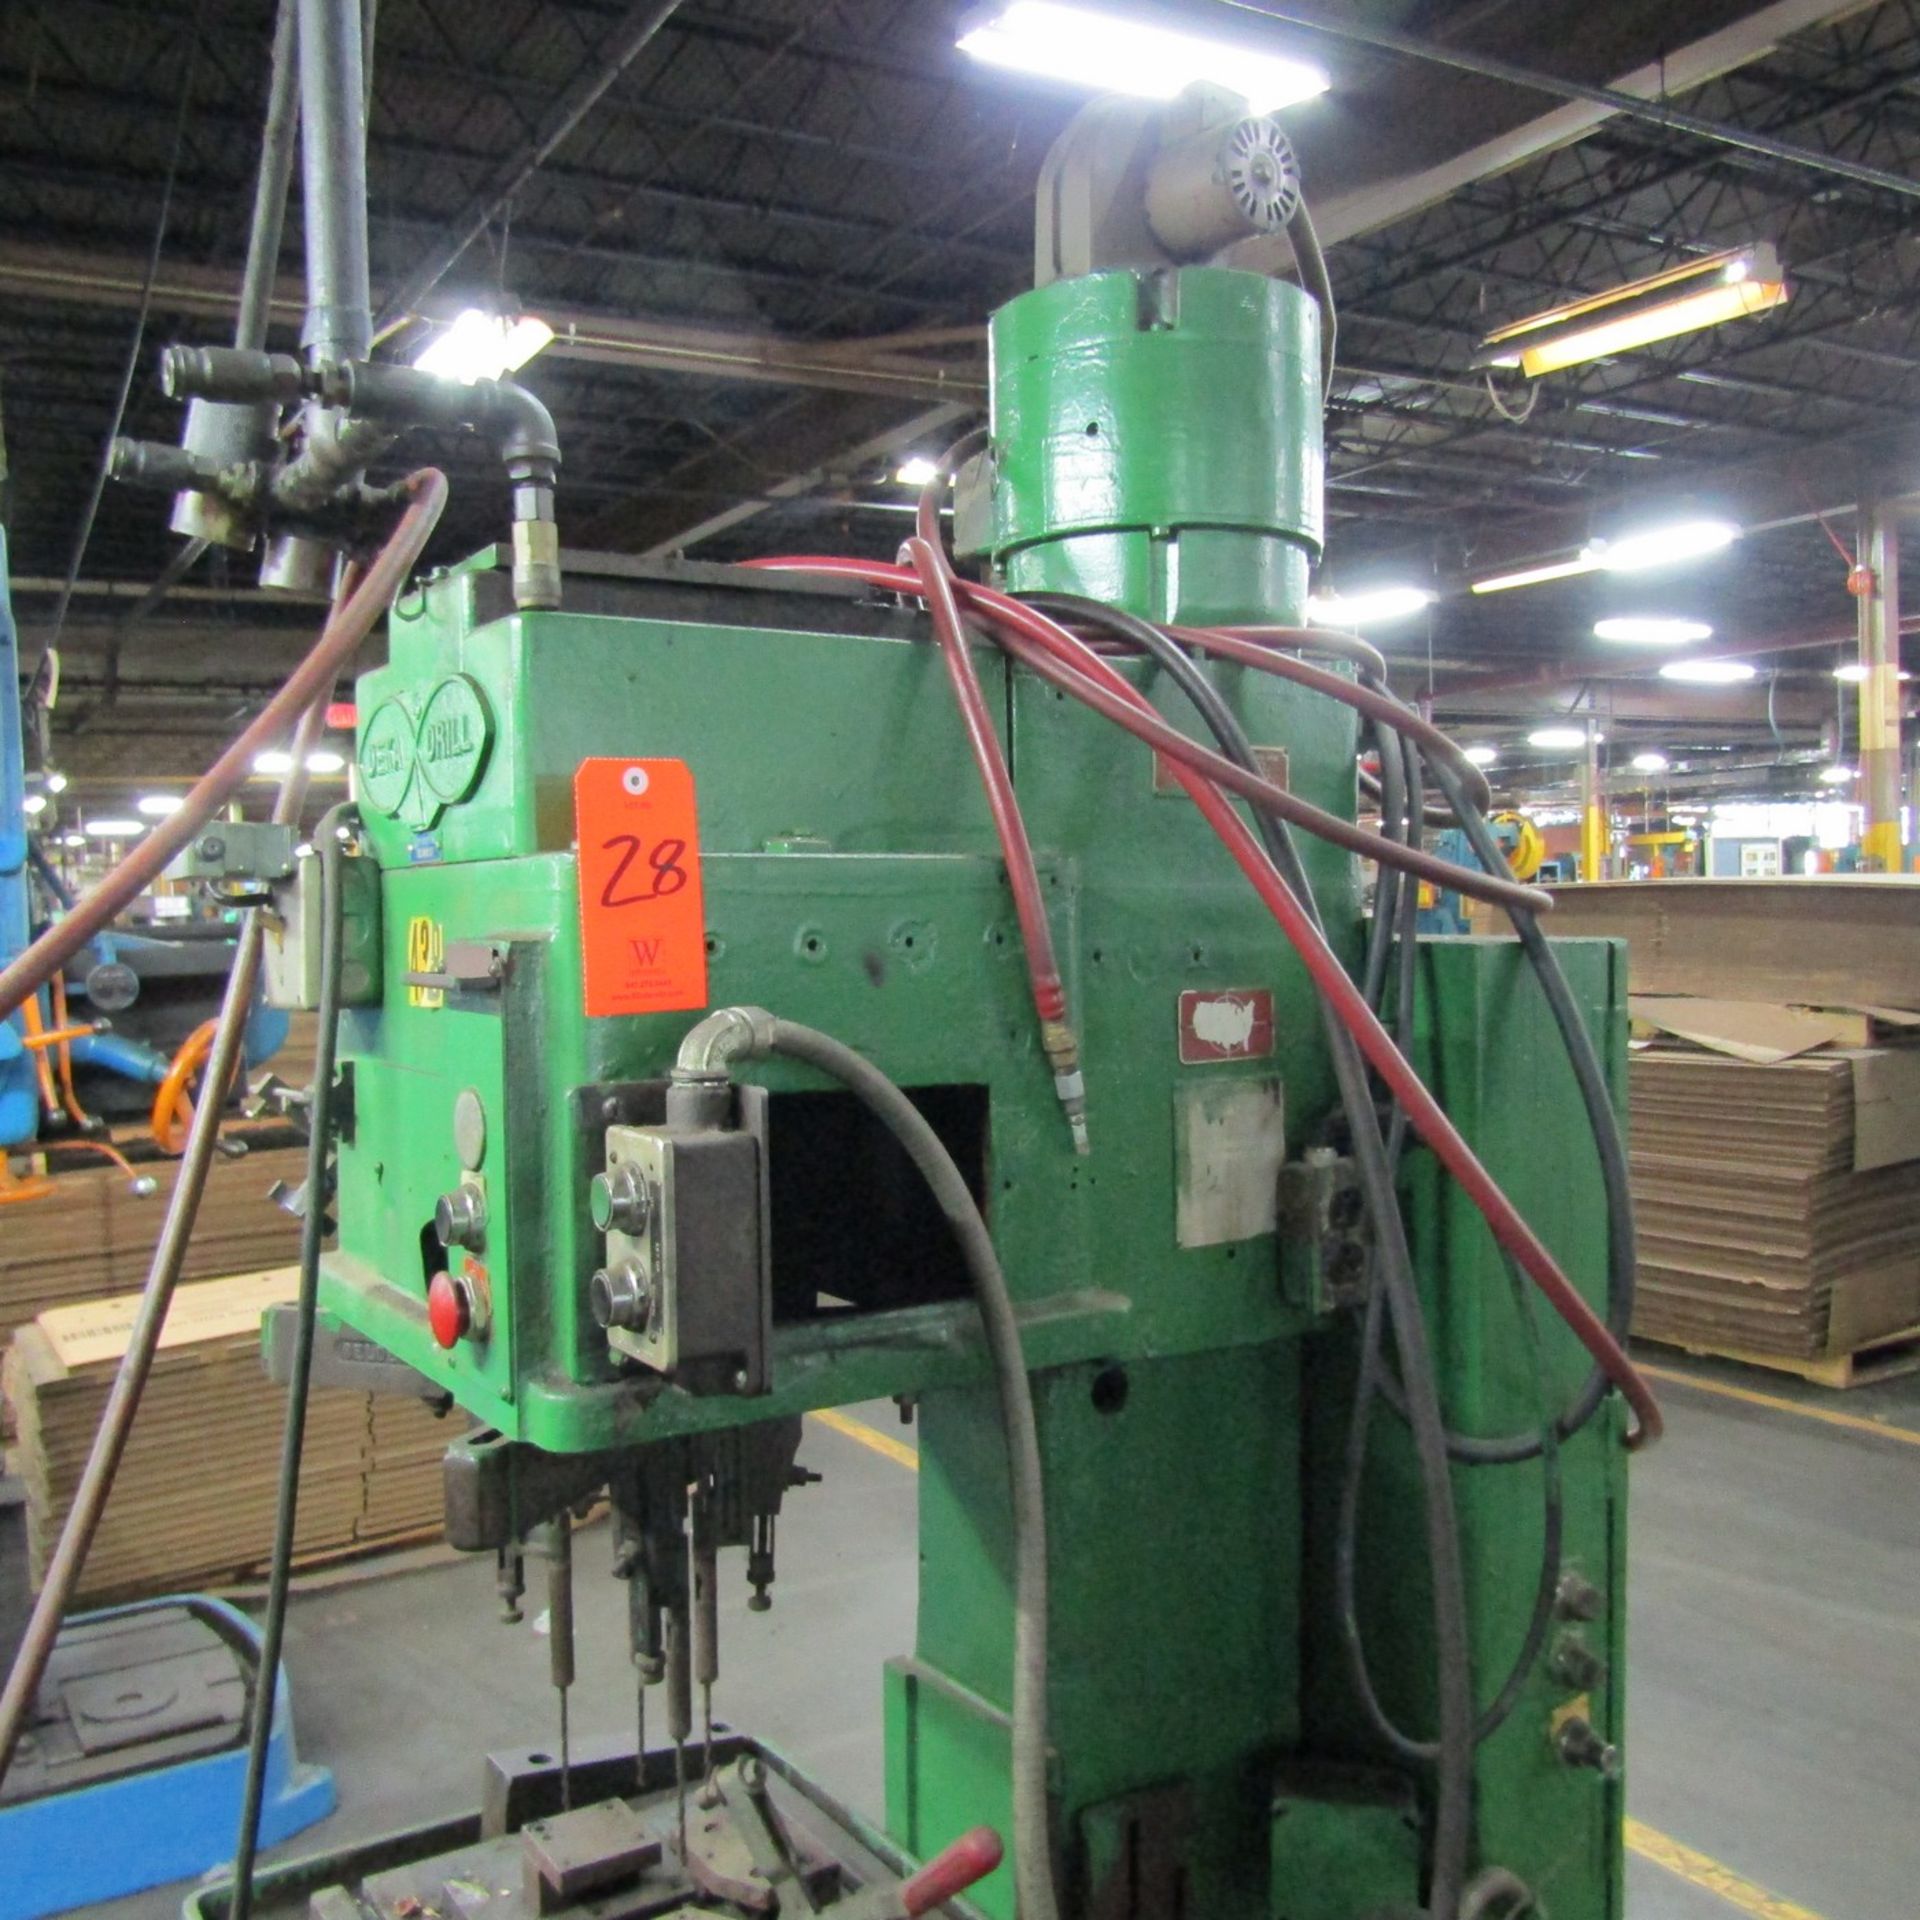 Delta Model HR-712-2 Vertical Production Drill, S/N: HRA 11862 K66; with 4-Spindle Drill Head, - Image 4 of 7